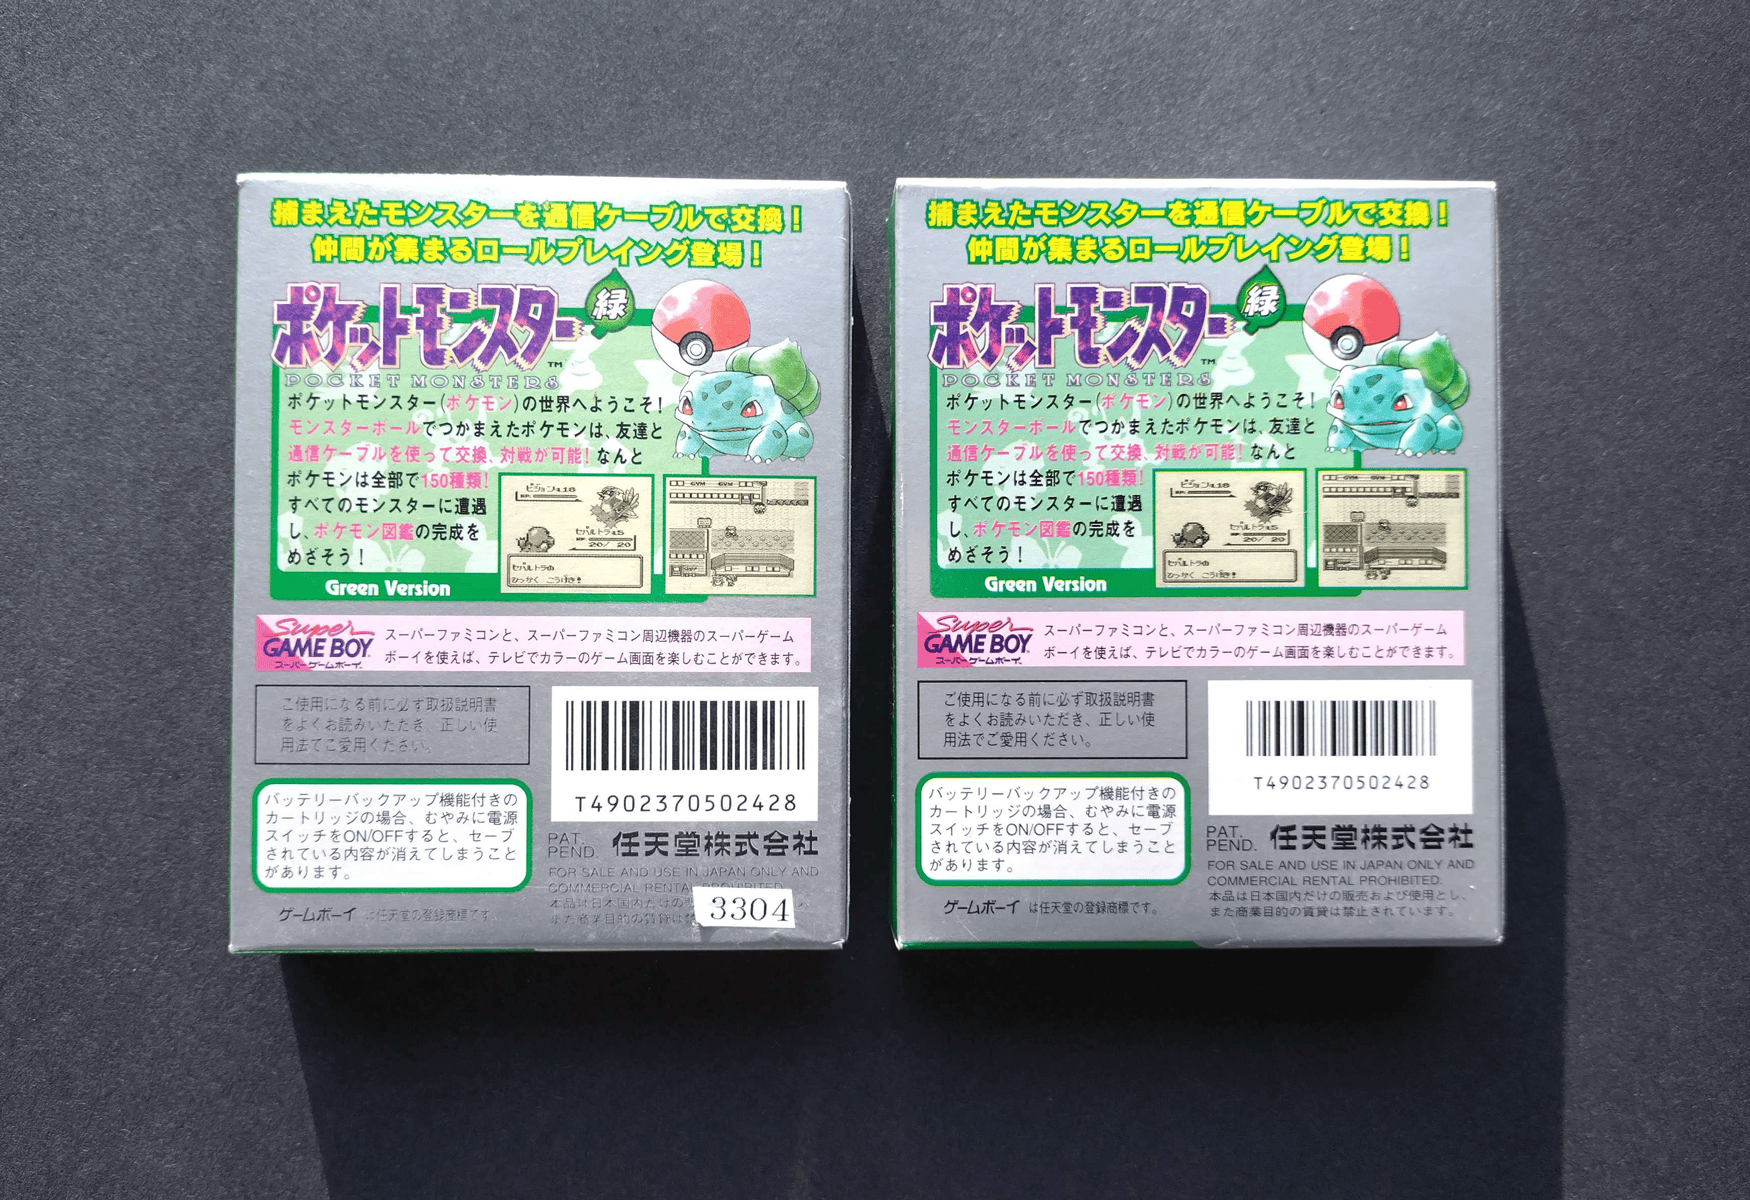 Green version: early print (left) and later print (right)